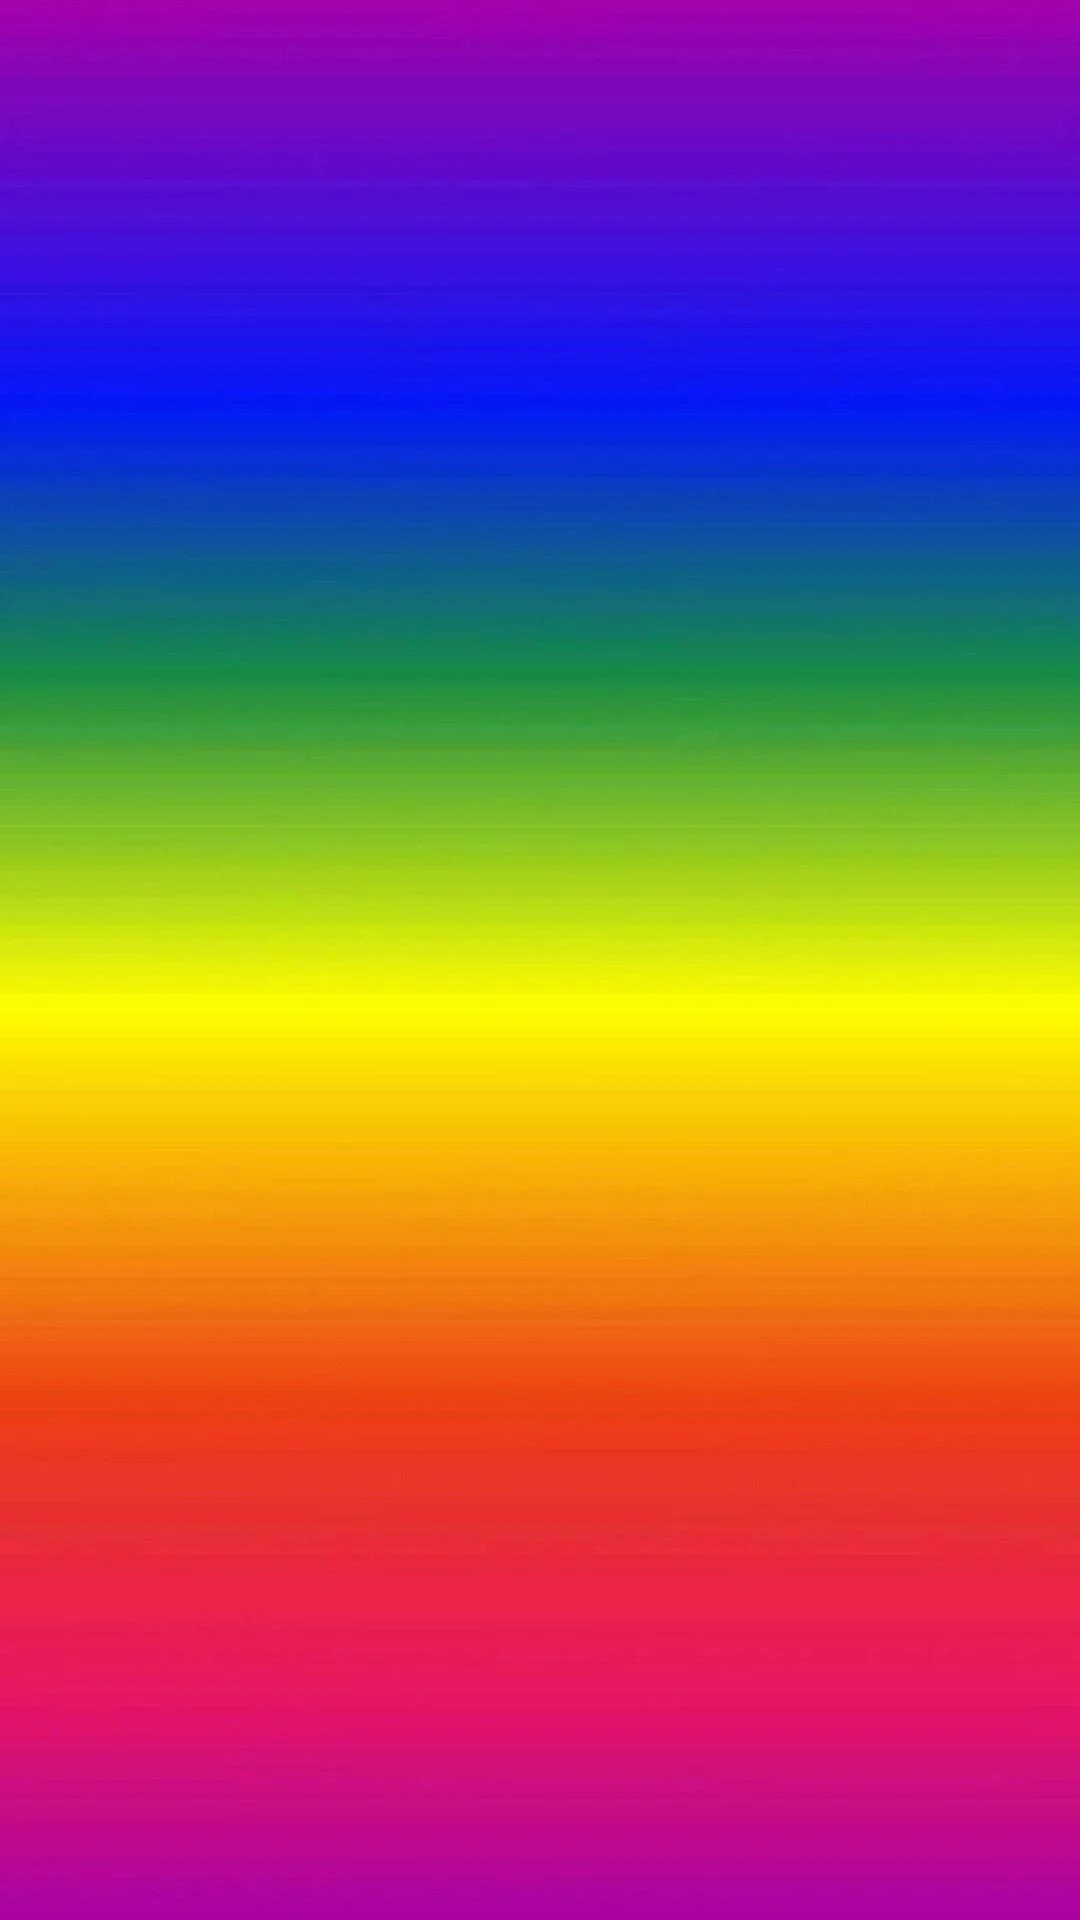 Rainbow colors wallpapers, Diverse color spectrum, Vibrant and lively, Colorful backdrops, 1080x1920 Full HD Phone